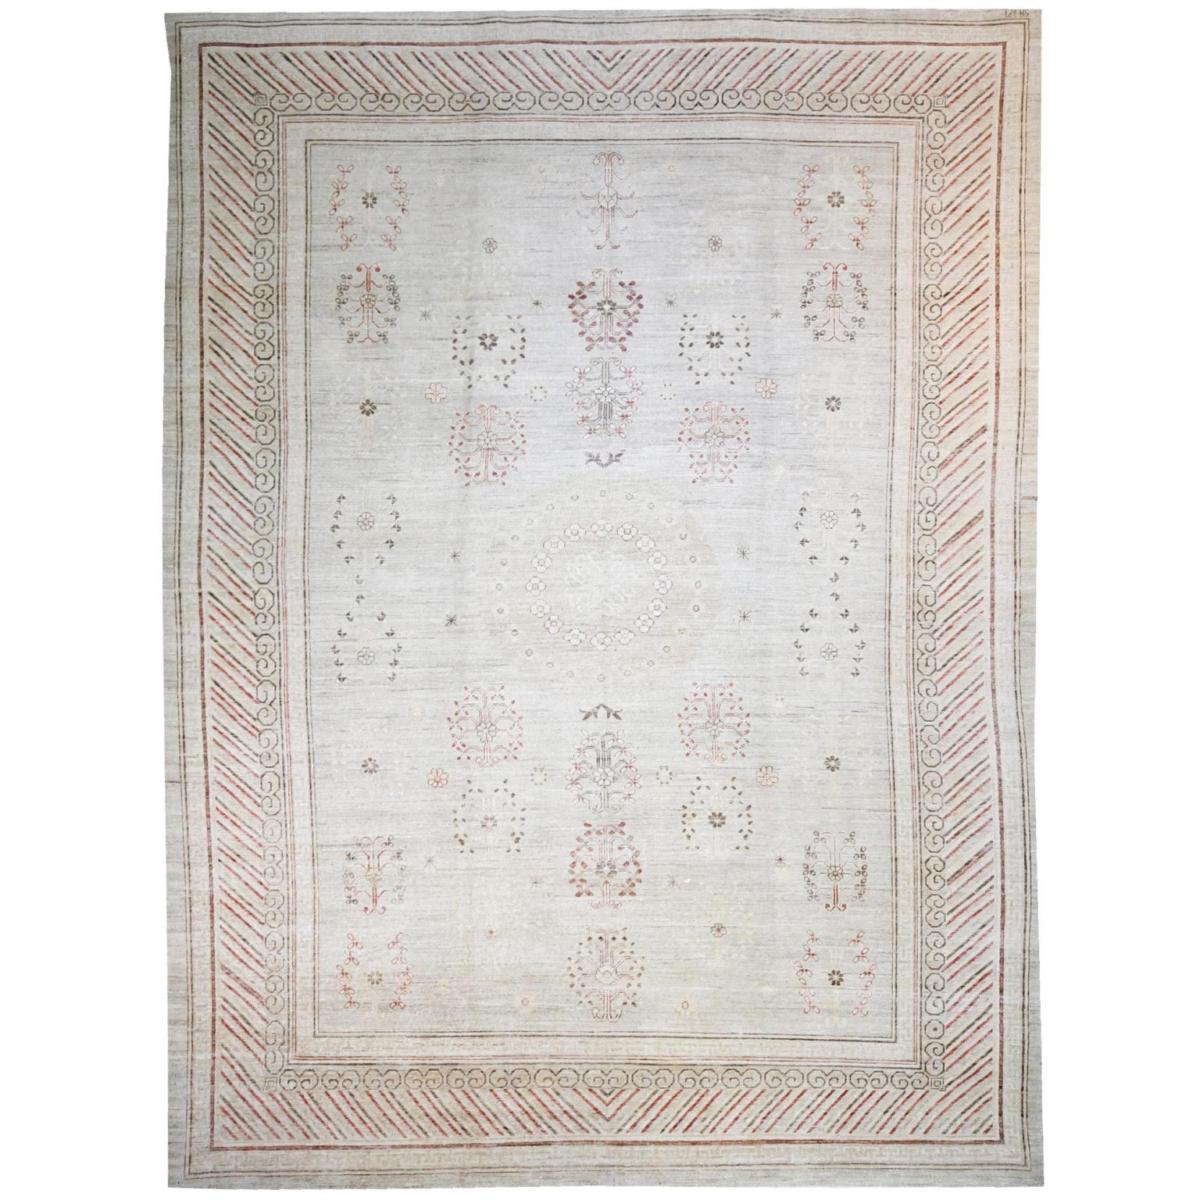 Tranquil Vintage Khotan 14′ x 10′ In Good Condition For Sale In Sag Harbor, NY